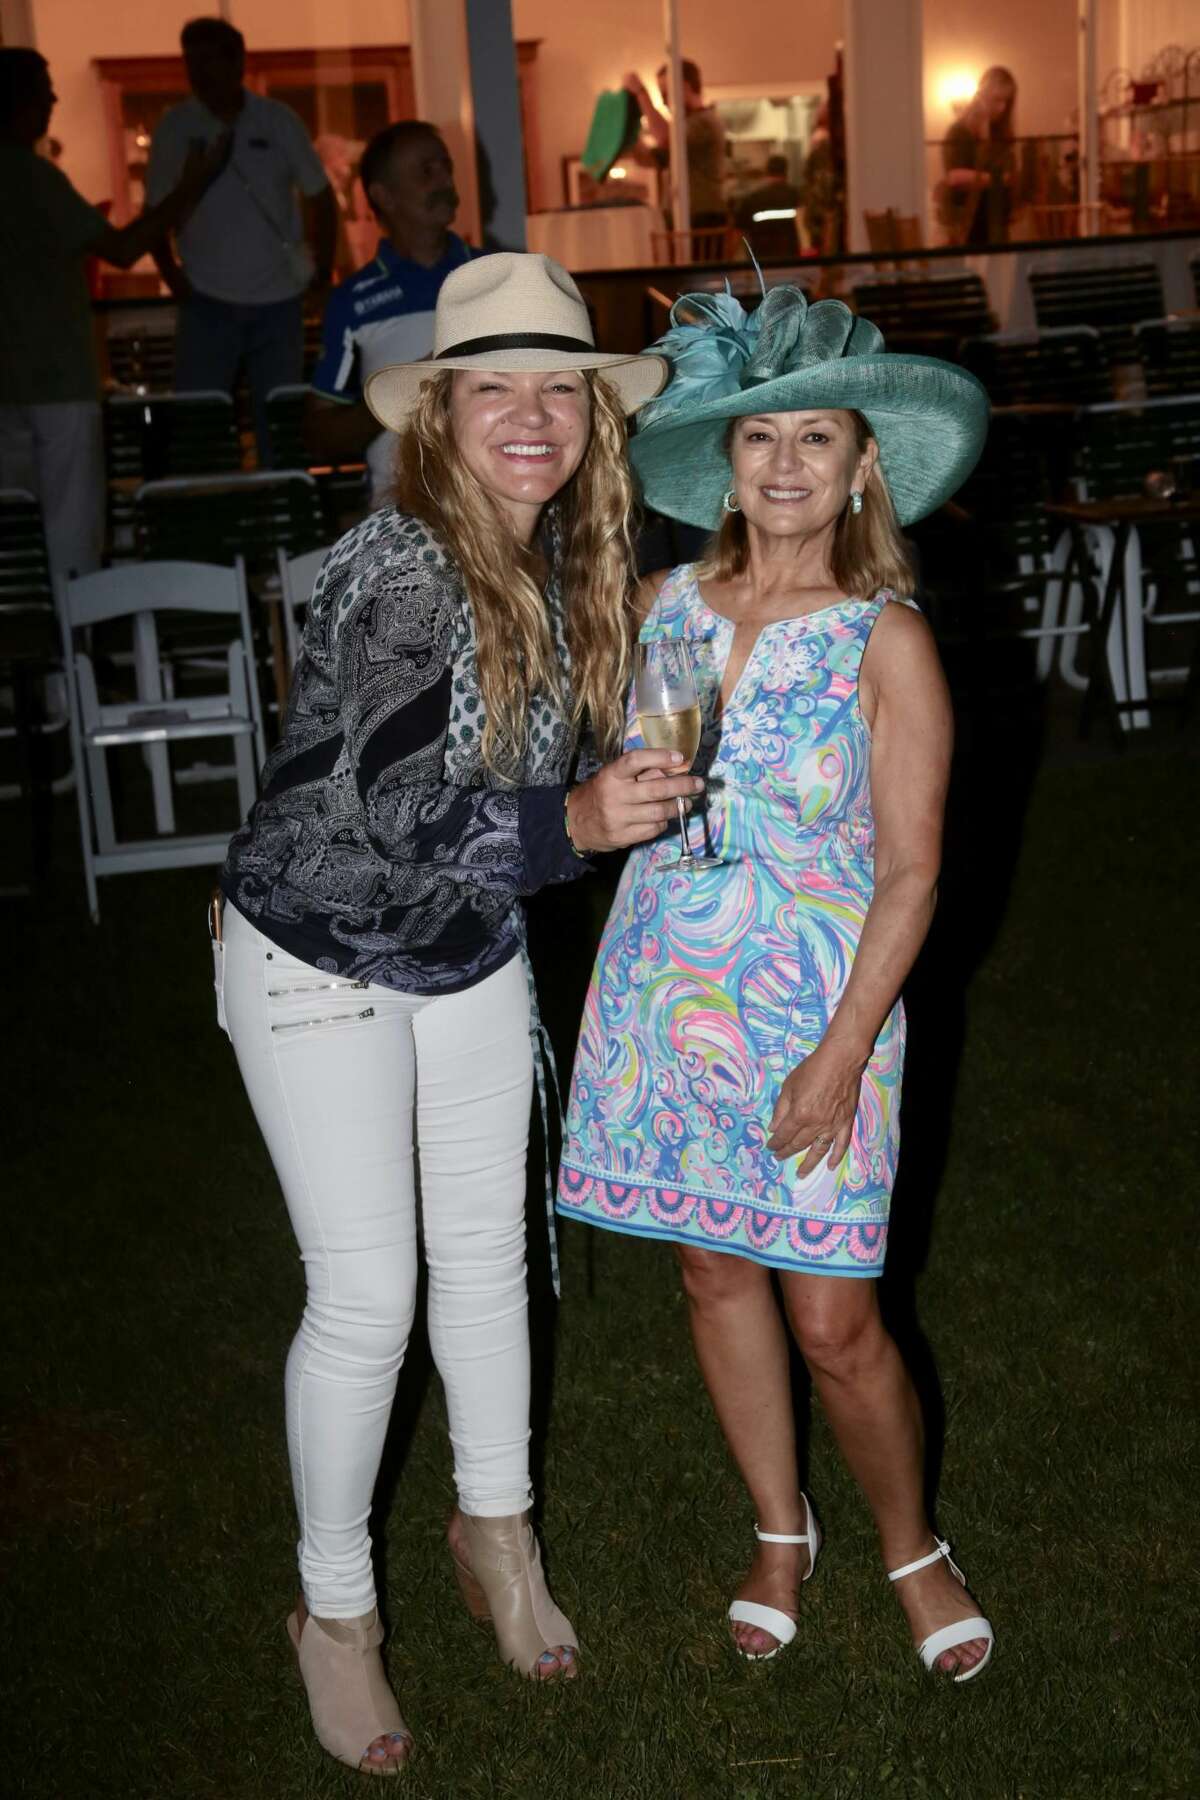 Were you Seen at The Ram Trucks Polo Hall of Fame Cup Finals at Saratoga Polo Association on September 2, 2018?